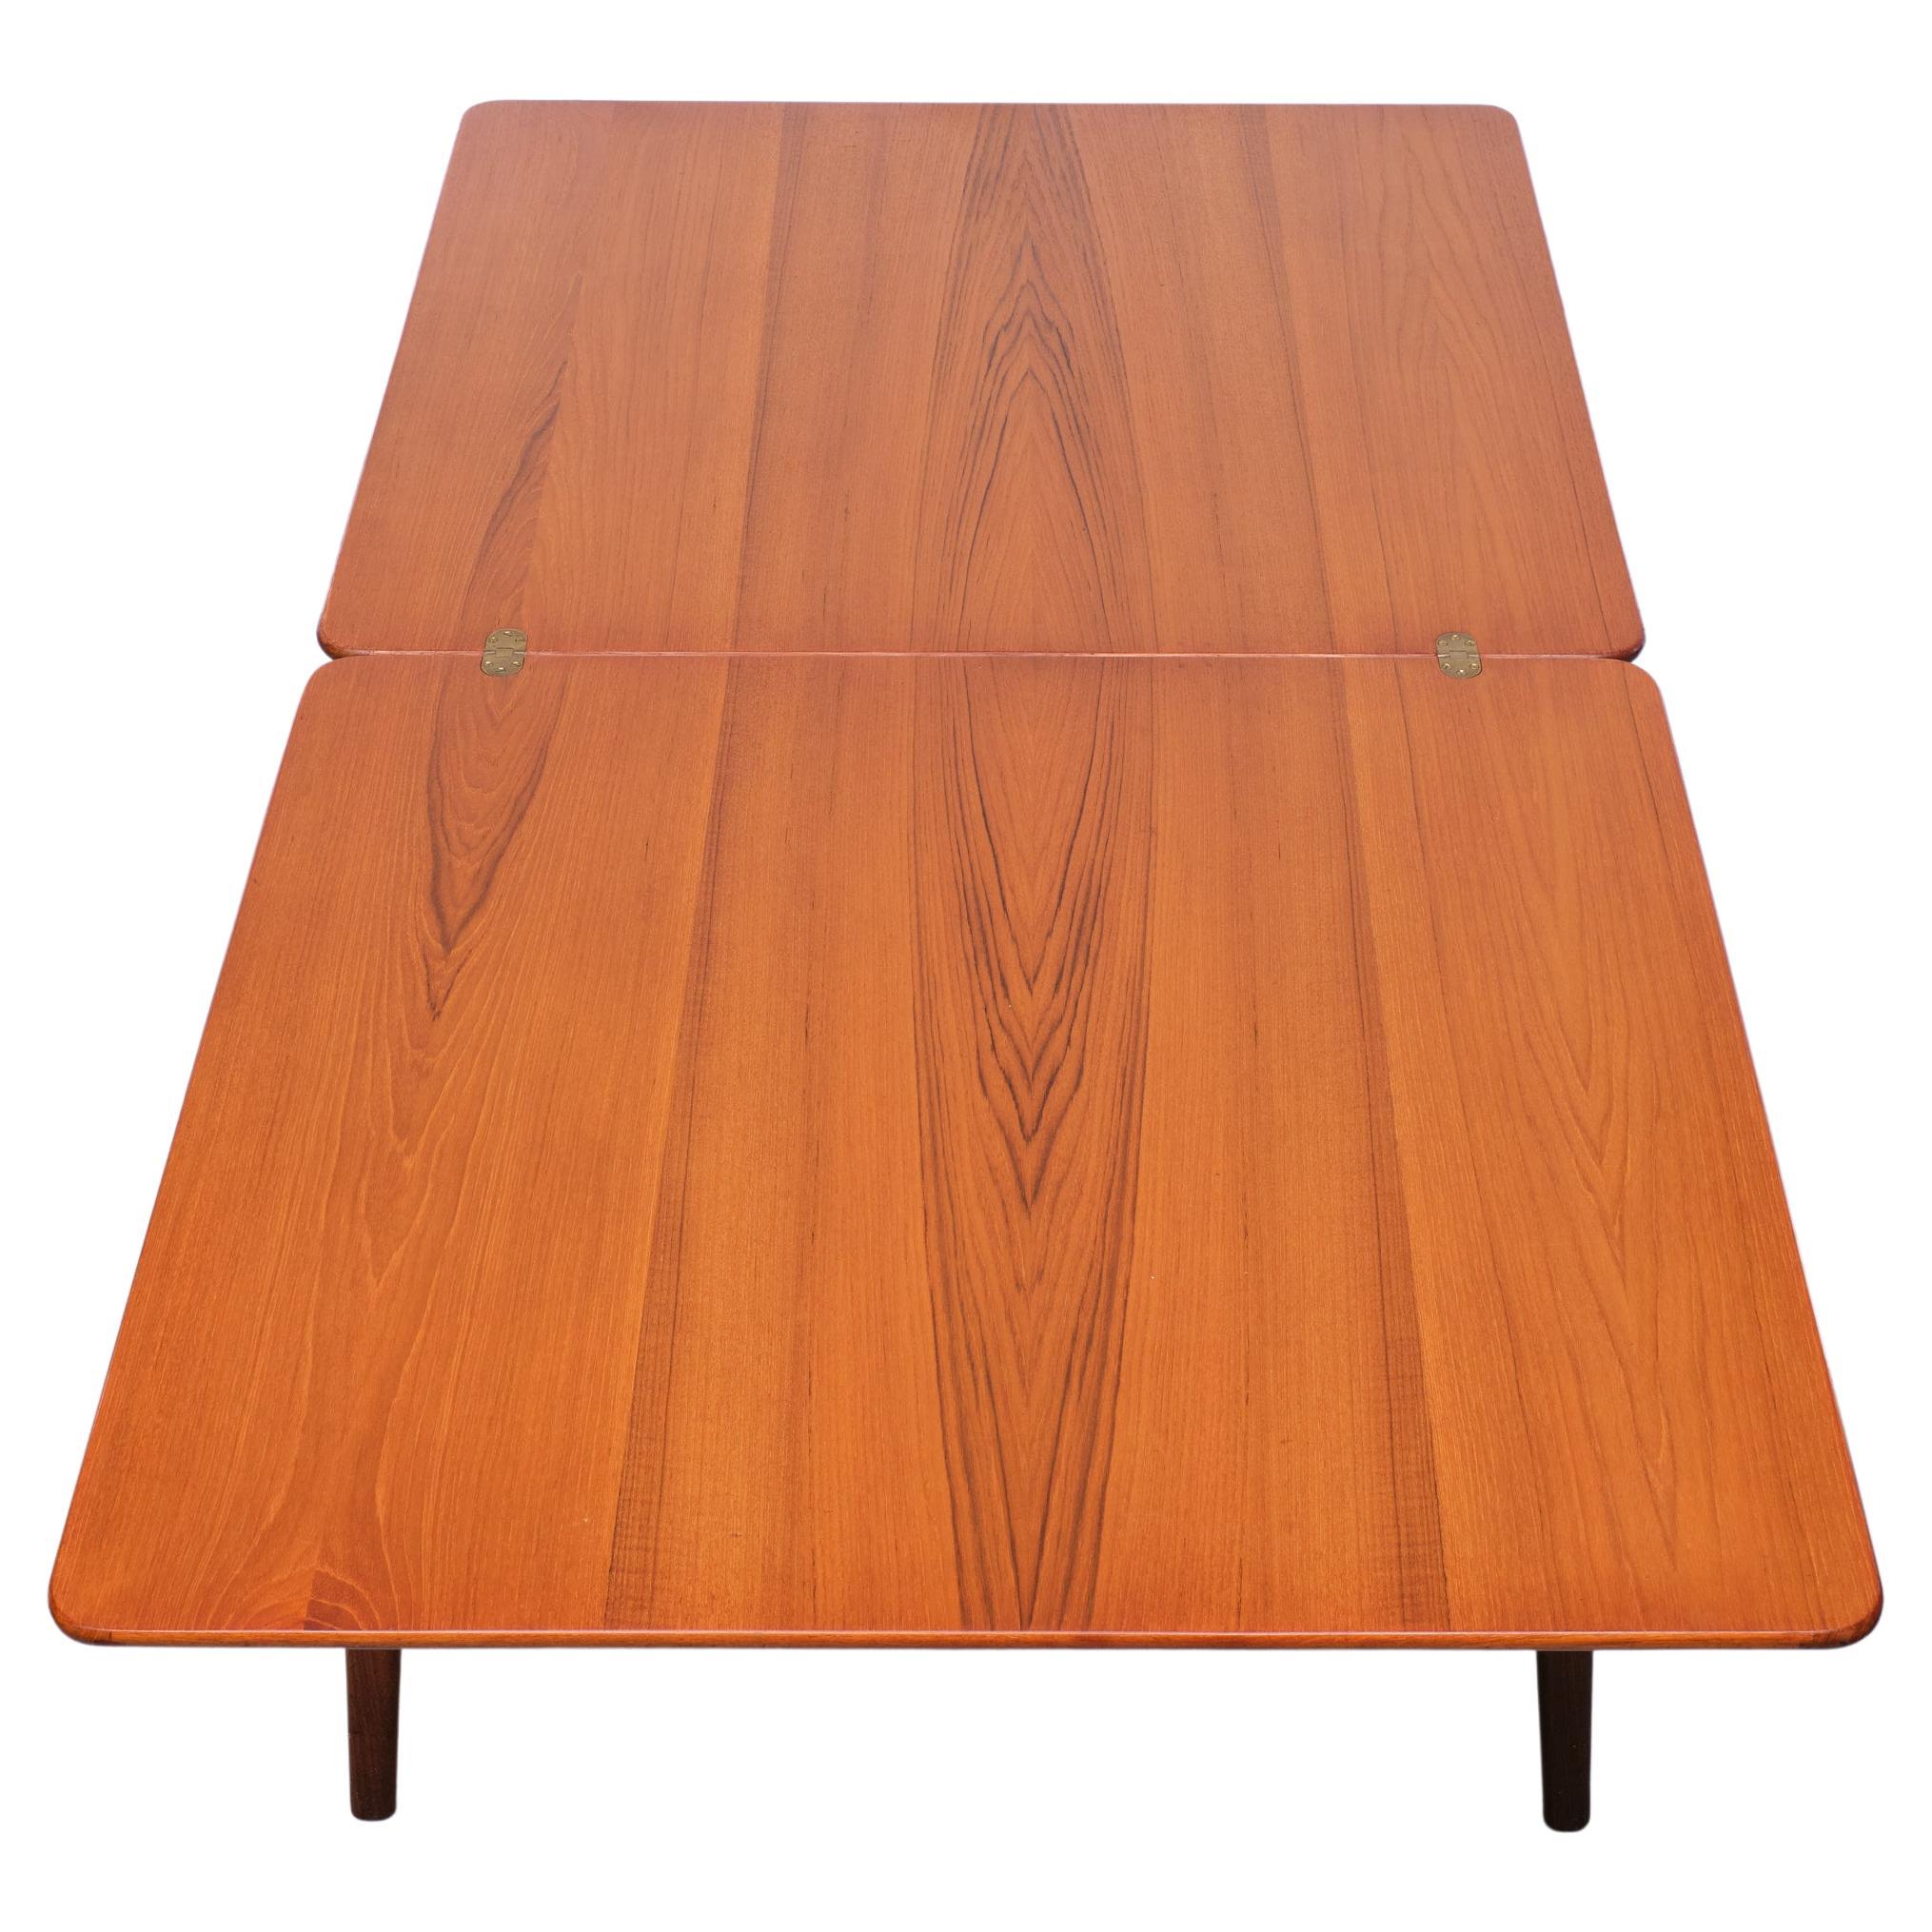 Beautiful dining table. Design by Louis Van Teeffelen for Wébé 1960s 
Very rare model. Pull out the legs and Simply folding out the top. 100cm /200 cm 
Superb grain on the Teak wood. Brass hinges. Signed.